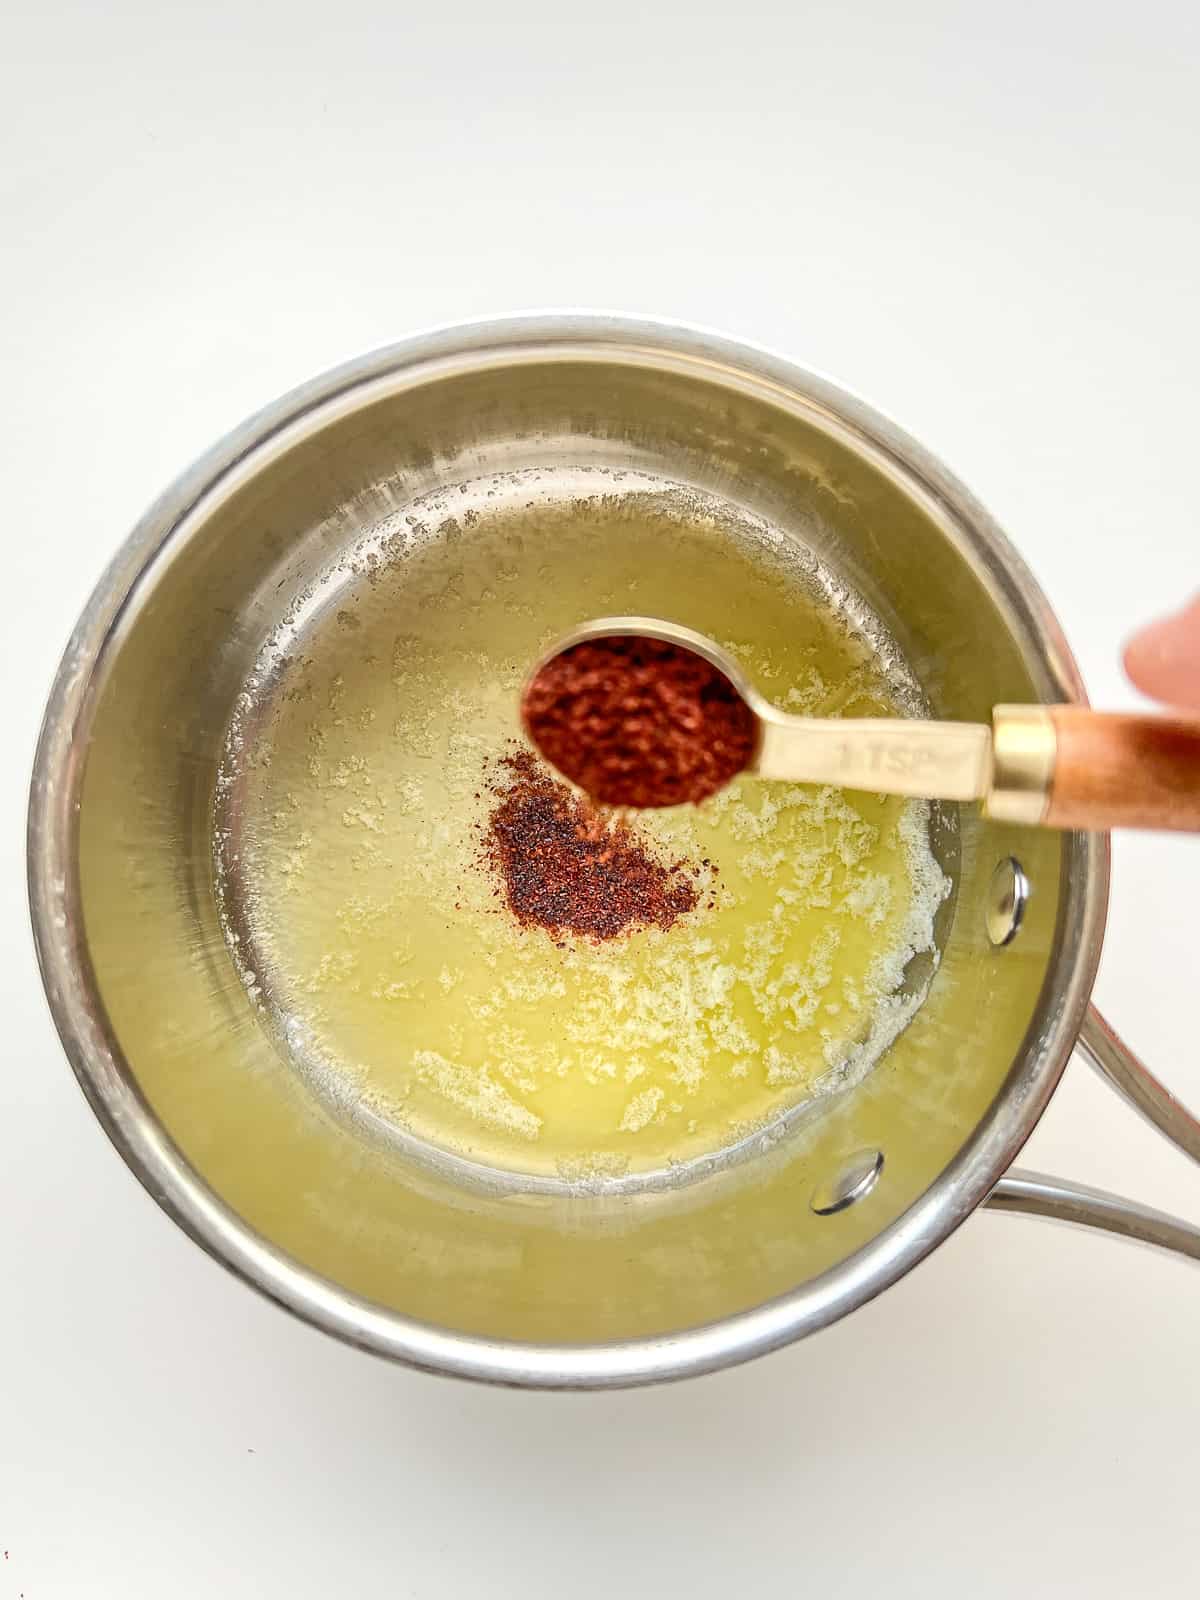 An image of sumac being sprinkled into melted butter.